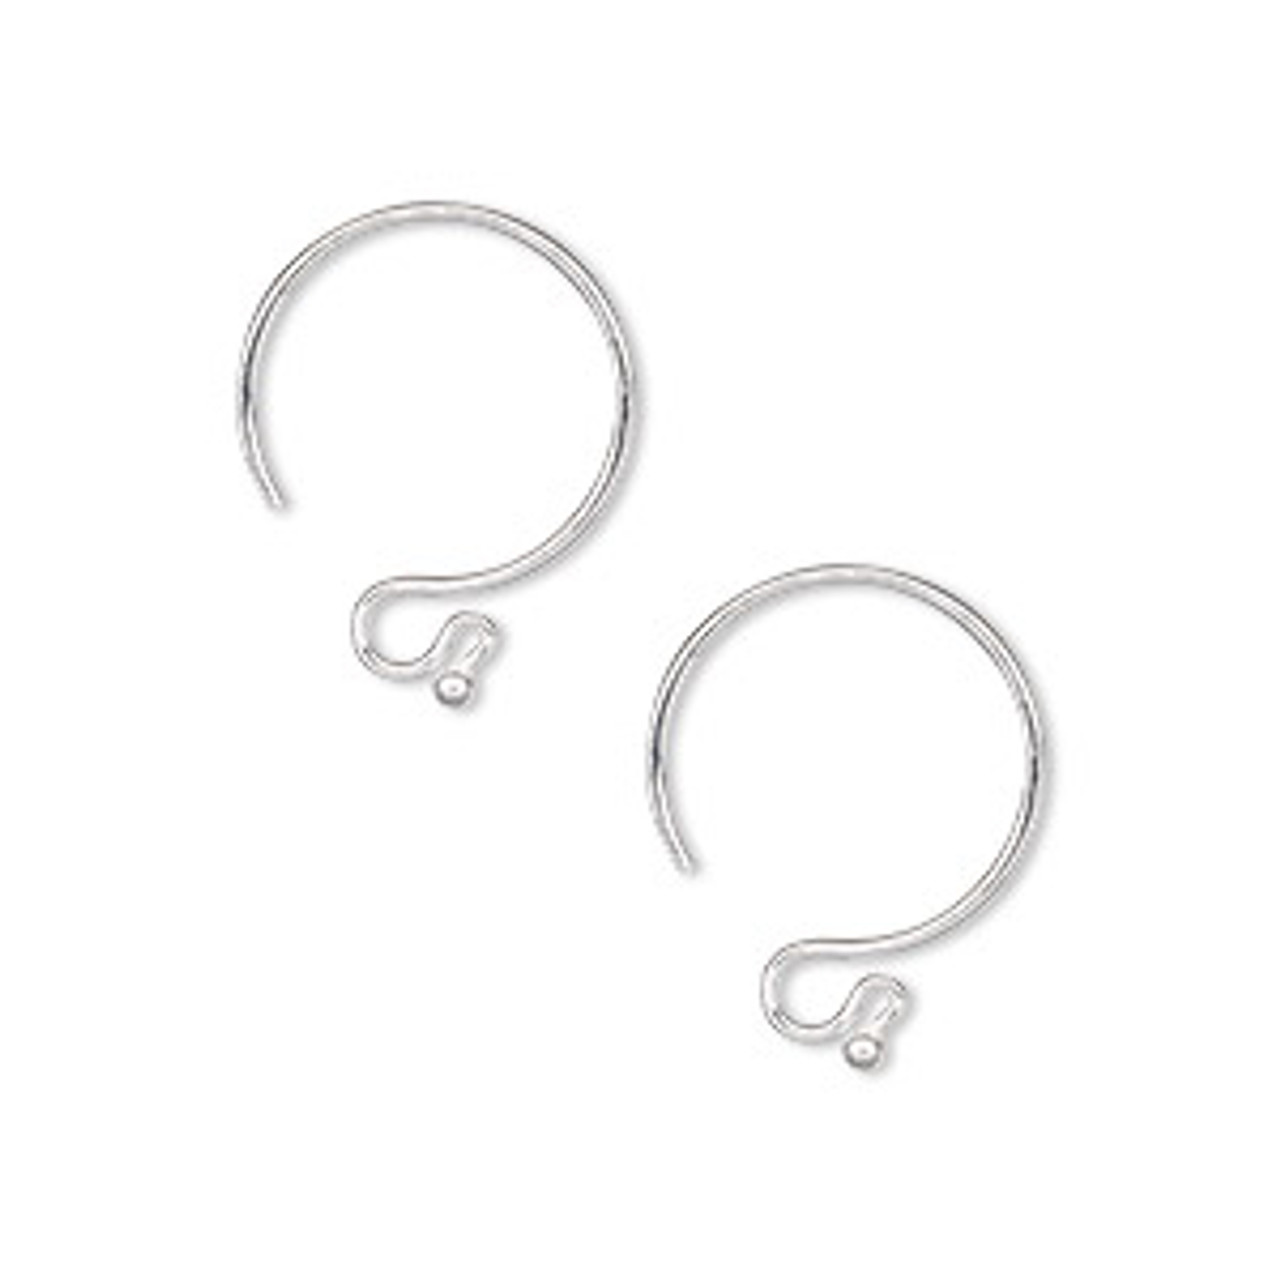 15mm French Hook with 1.5mm Ball - Silver Plated Brass - 5 Pair